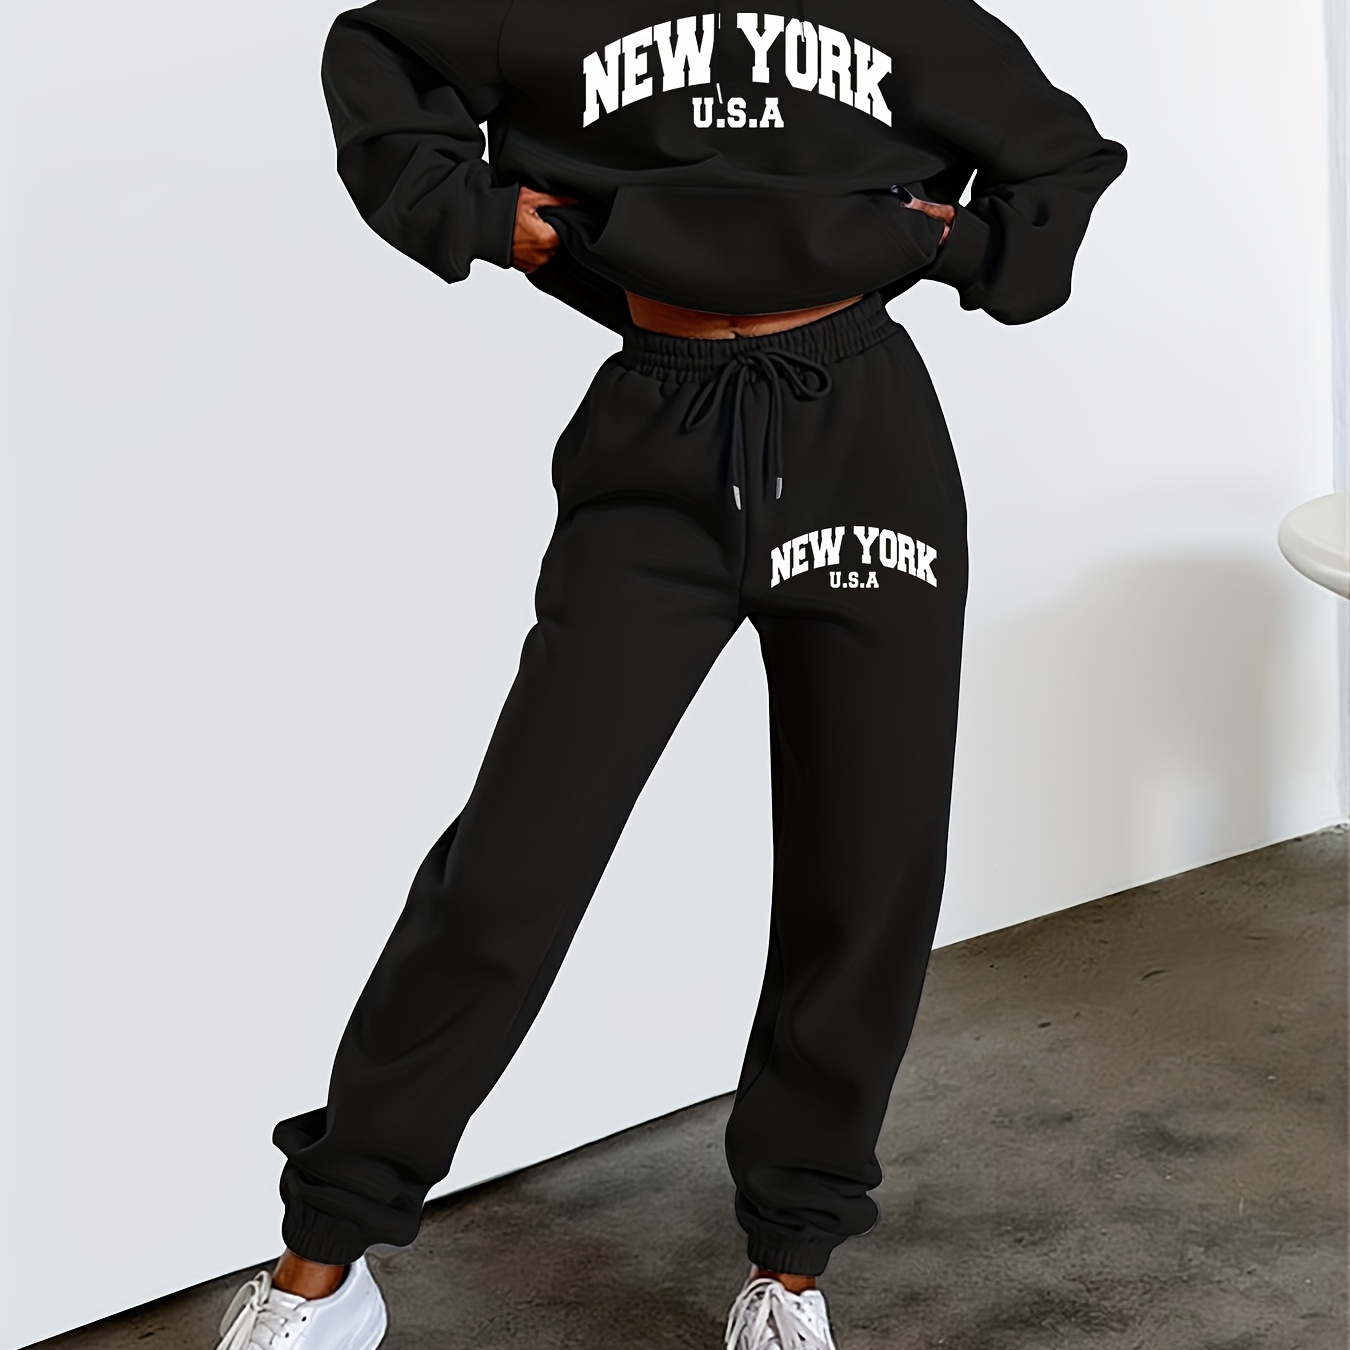 

Women's Casual Trendy Hooded Tracksuit Set - Include Long Sleeve Sweatshirt And Sports Pants, Letter Print, Drawstring, Micro-elastic, Sporty Style